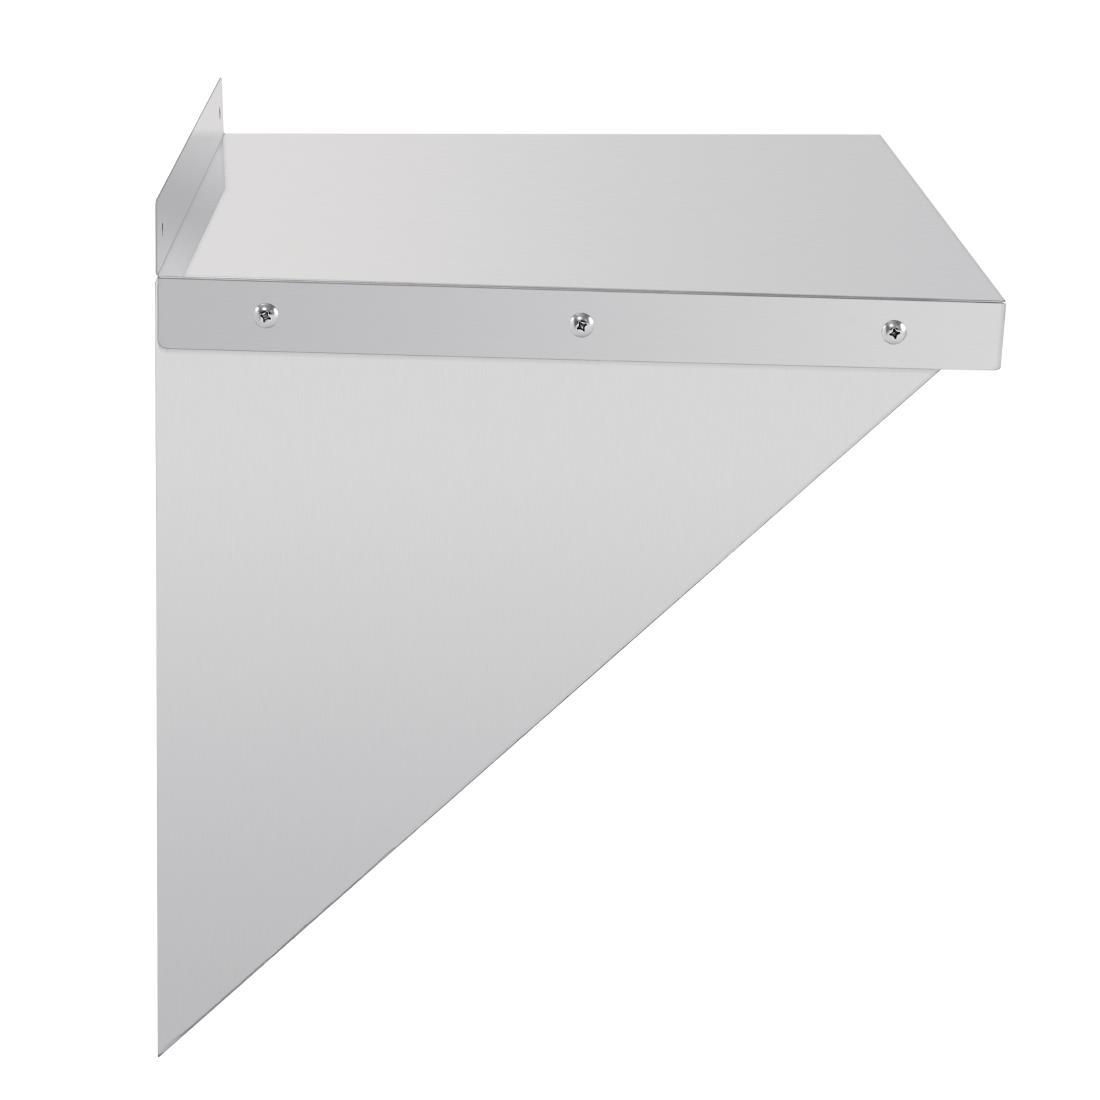 Vogue Stainless Steel Microwave Shelf Large - CB912  - 4